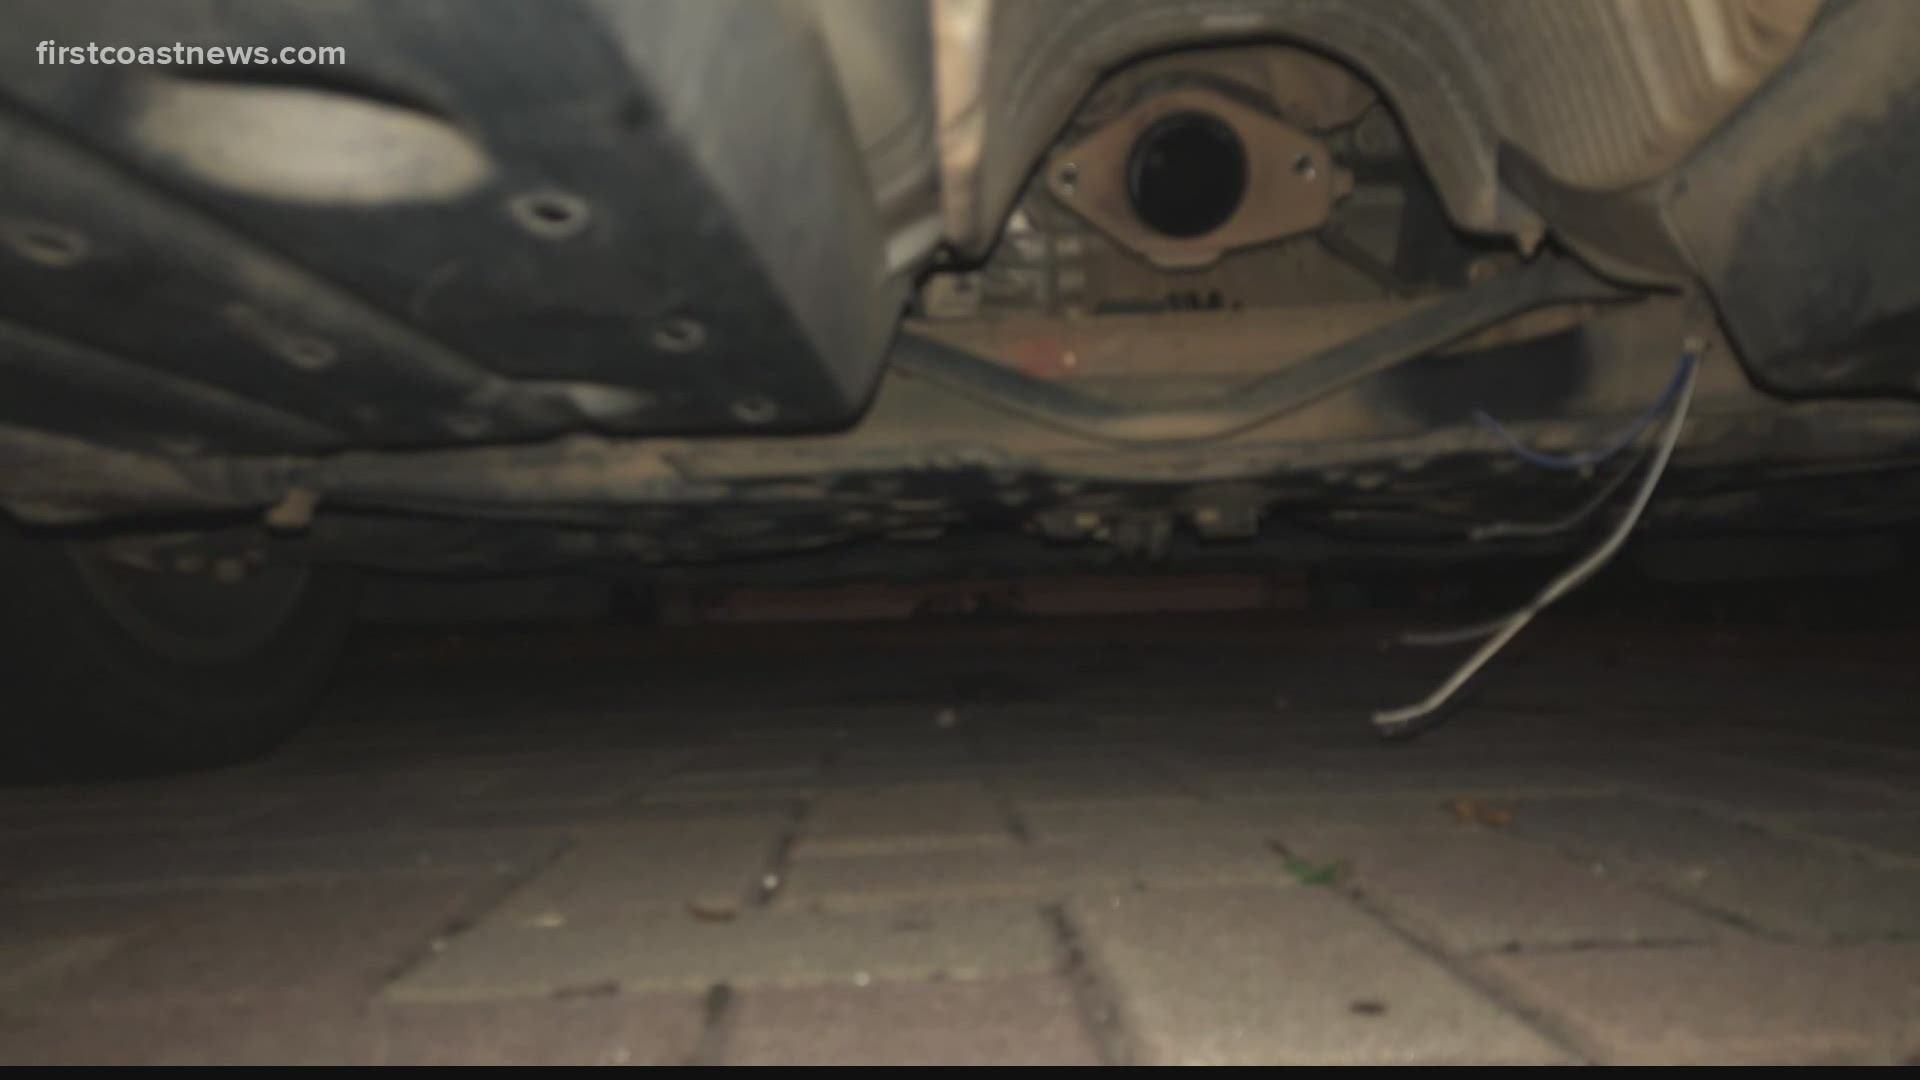 Marie Humphress says someone recently stole the catalytic converter from her 2007 Toyota Prius.